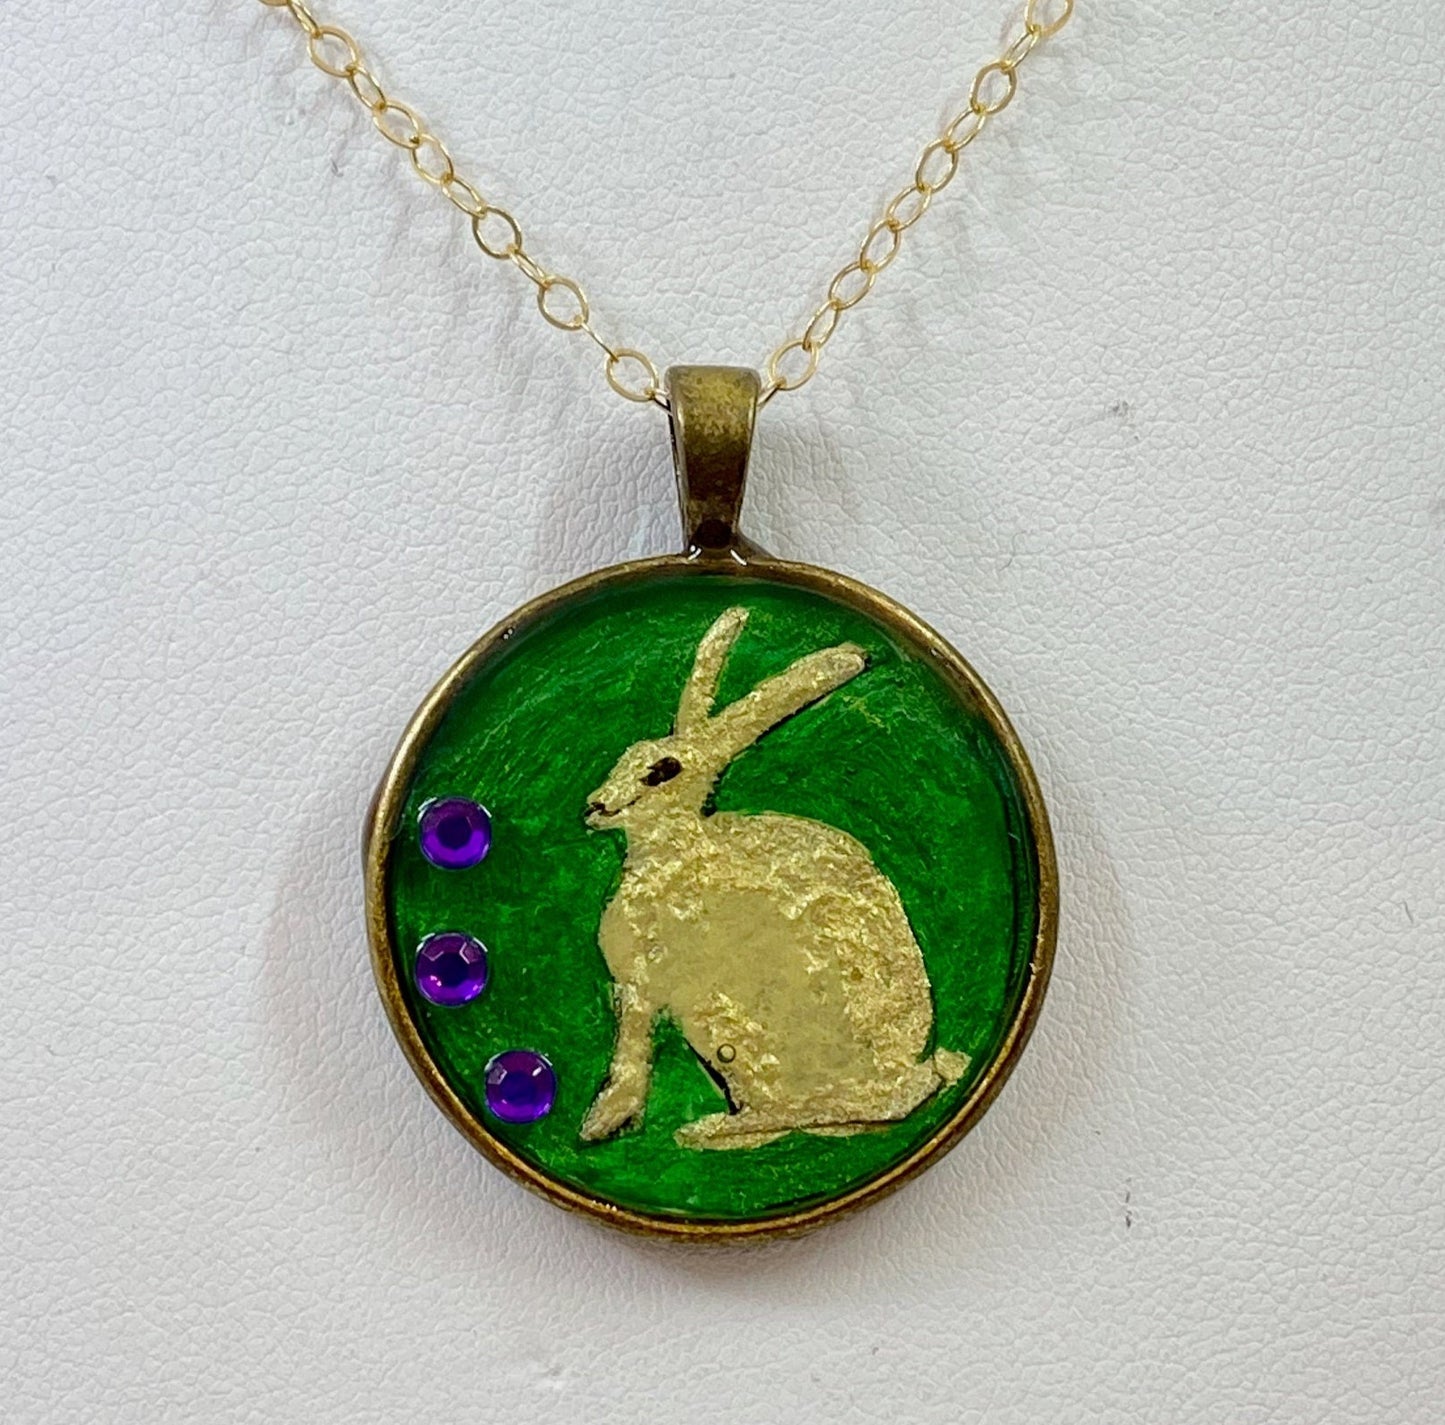 Bunny and crystal pendant. The bunny is hand painted and accented with crystal beads. Brass frame and brass chain.